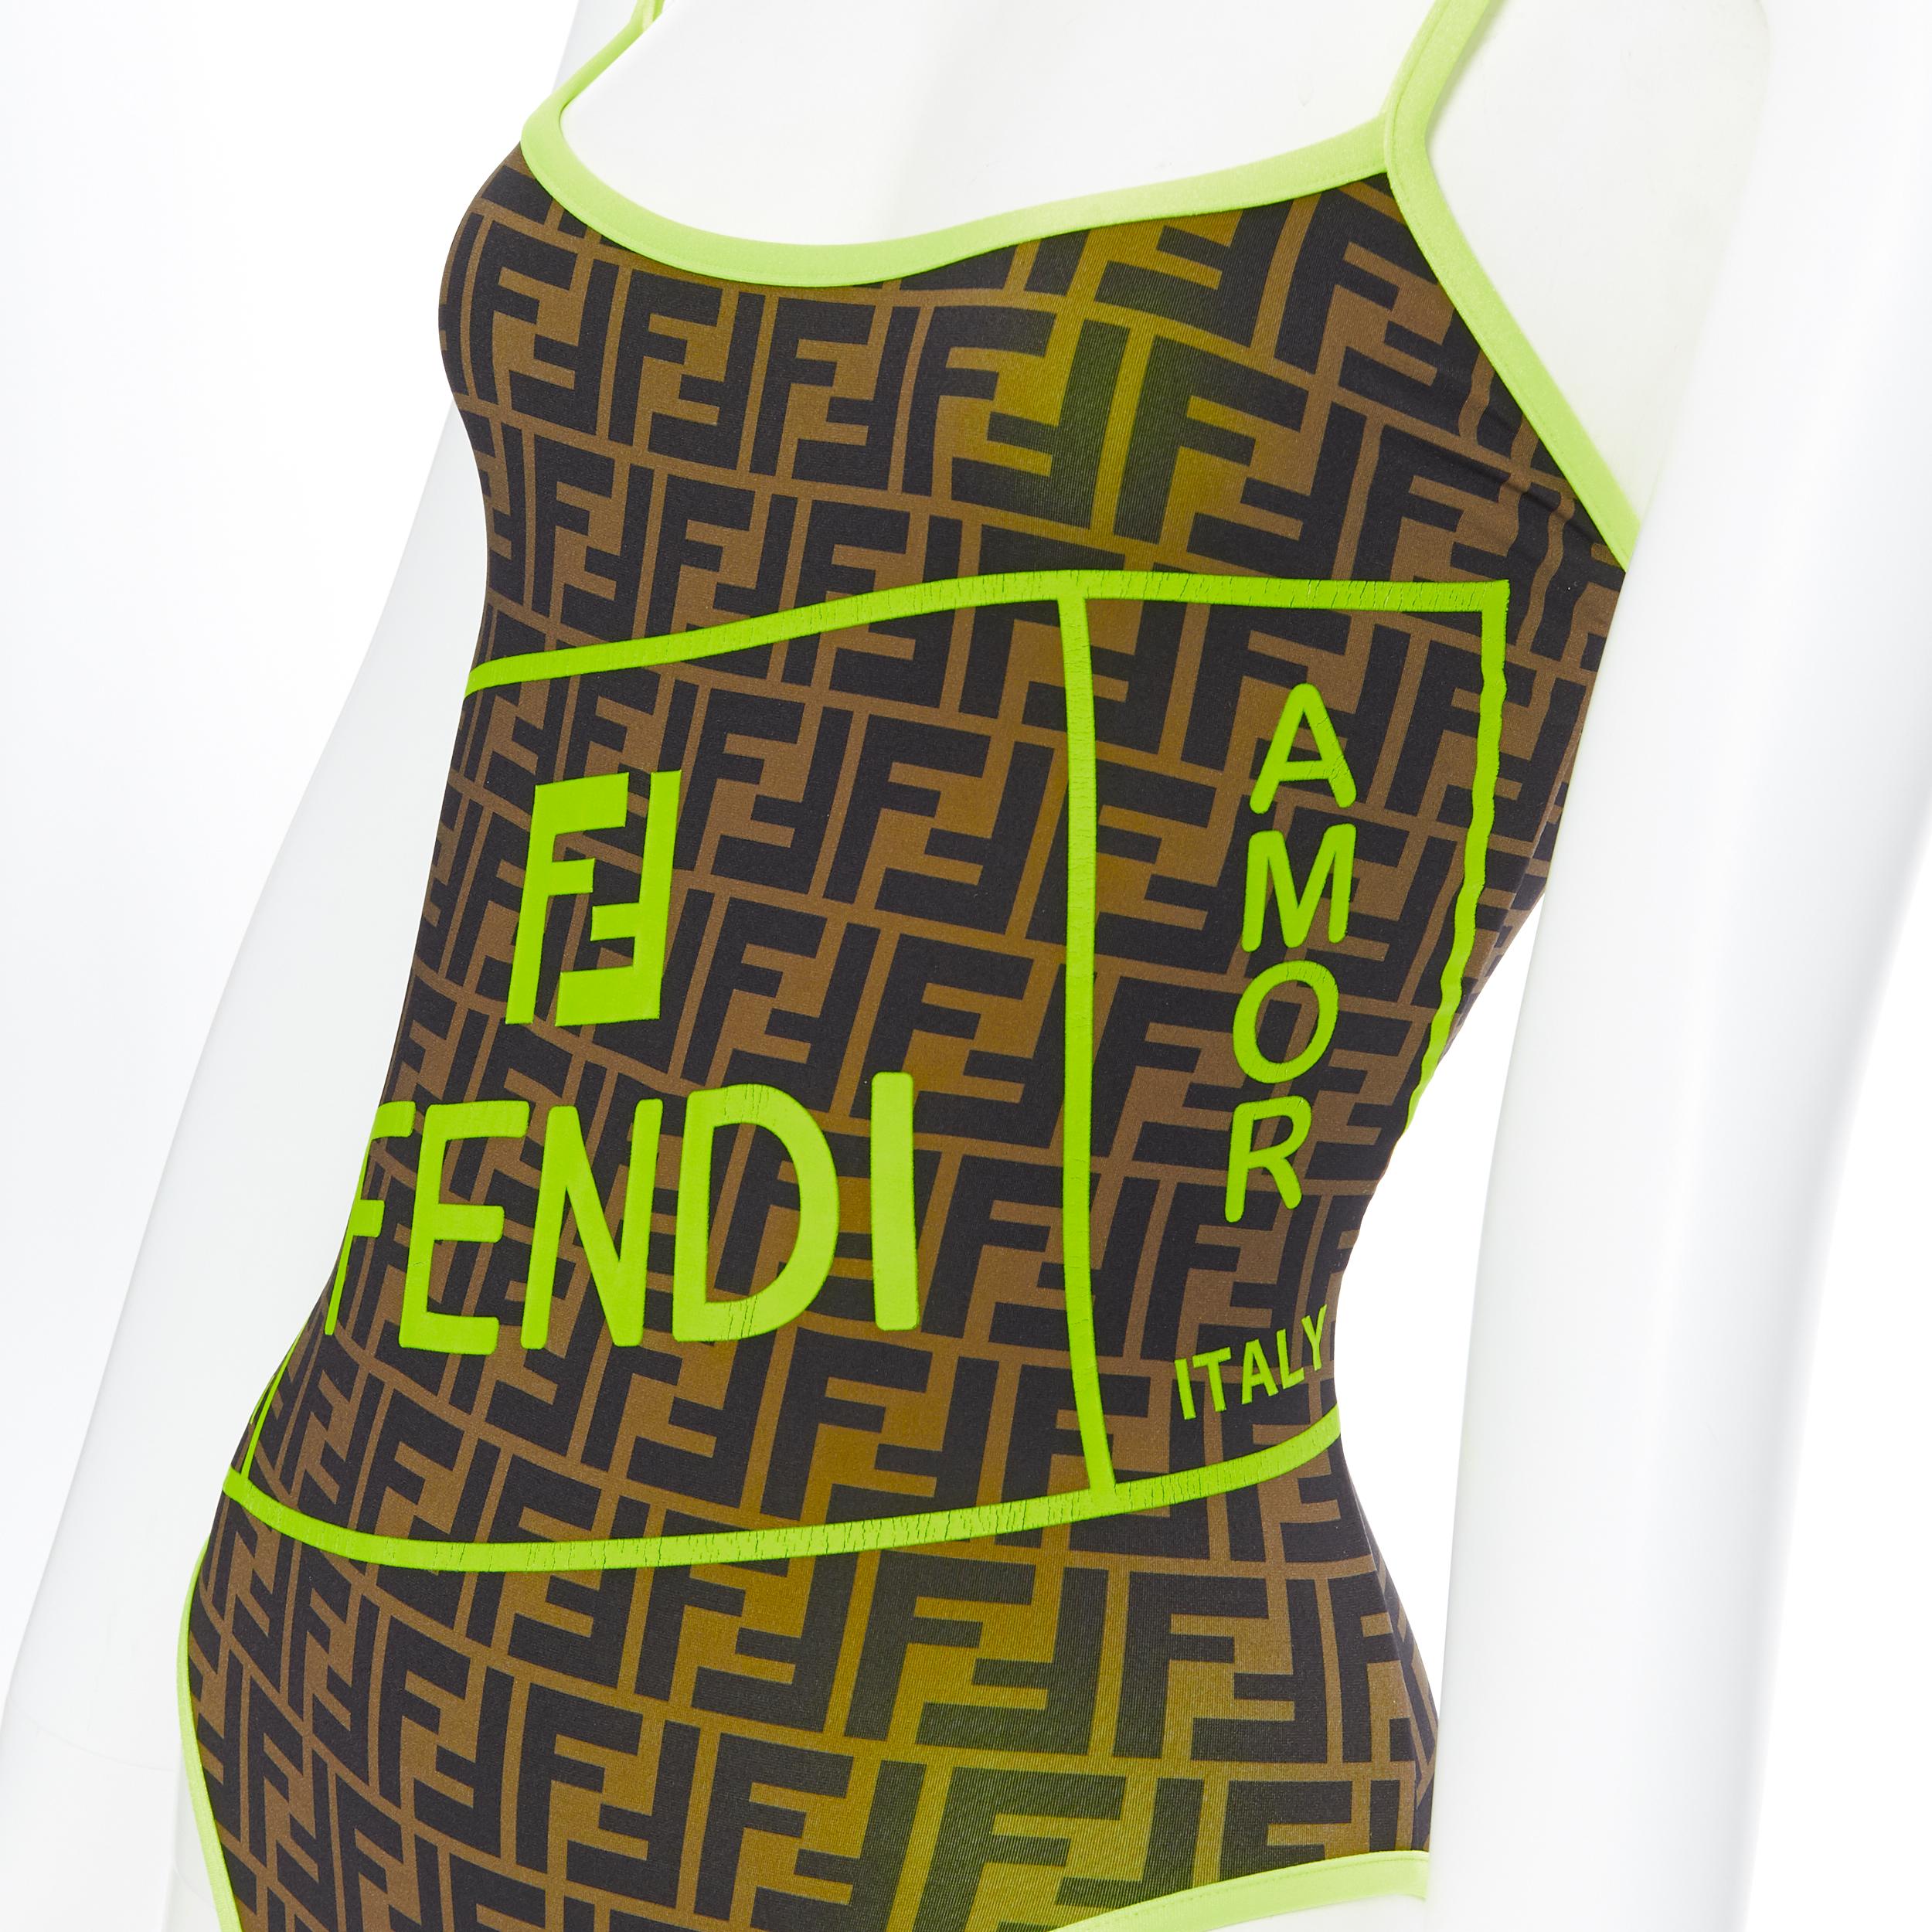 new FENDI Roma Amor brown Zucca neon yellow trimmed one piece swimsuit IT36
Brand: Fendi
Collection: 2019
Model Name / Style: One piece swimsuit
Material: Polyester blend
Color: Brown, yellow
Pattern: Abstract
Extra Detail: Neon yellow trimming.